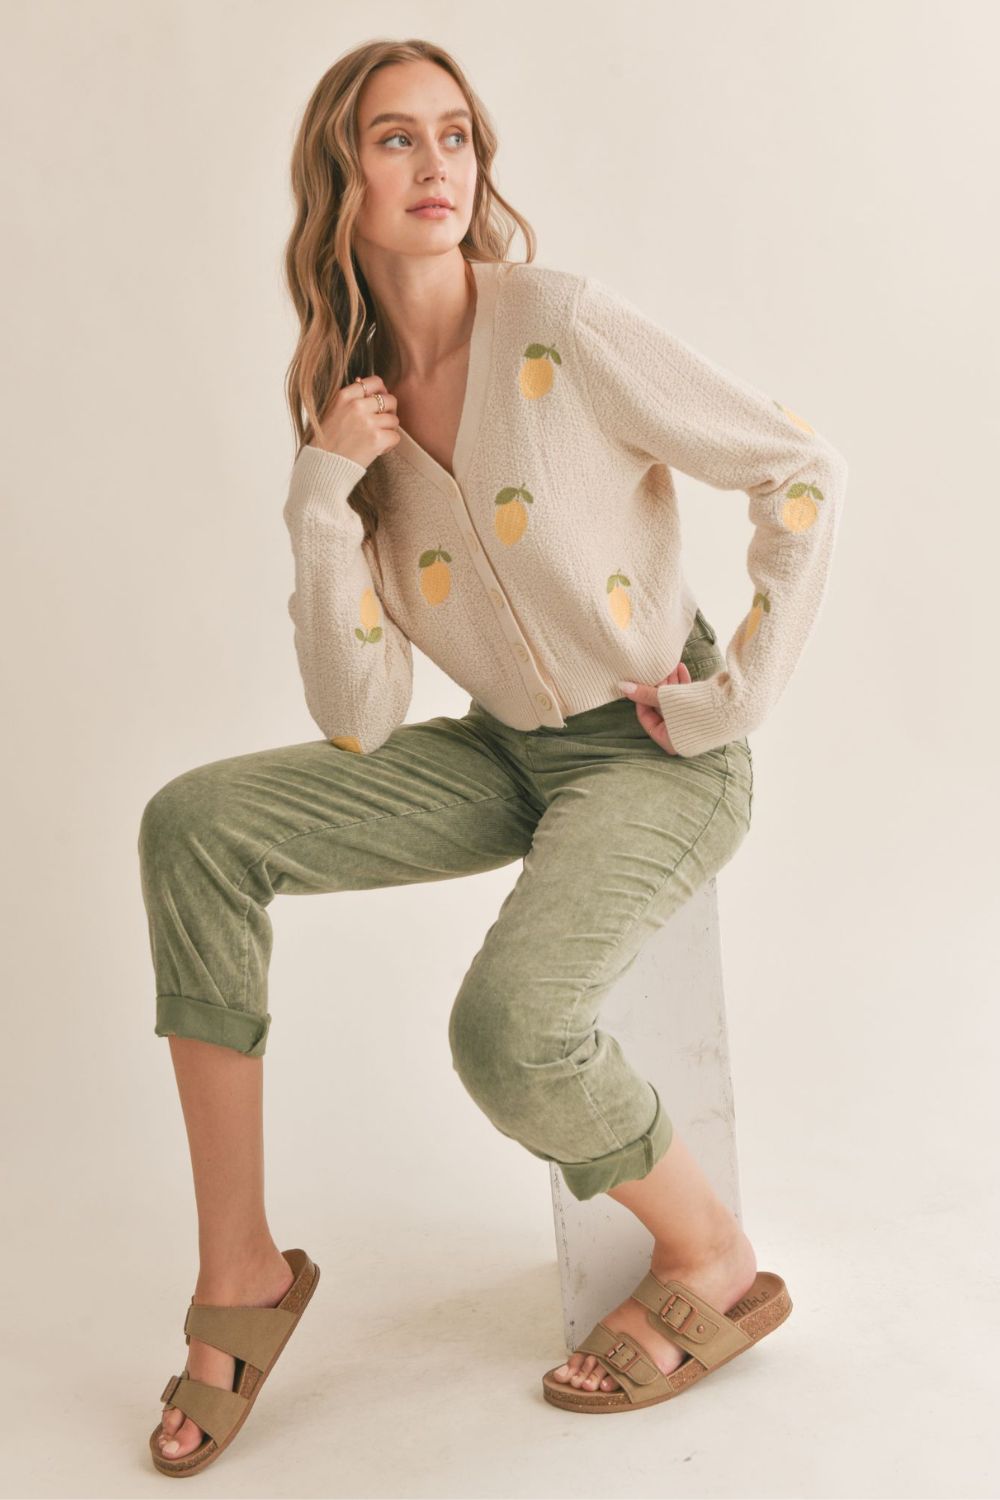 Women&#39;s Embroidered Lemon Cardigan | Light Beige - Women&#39;s Sweaters - Blooming Daily